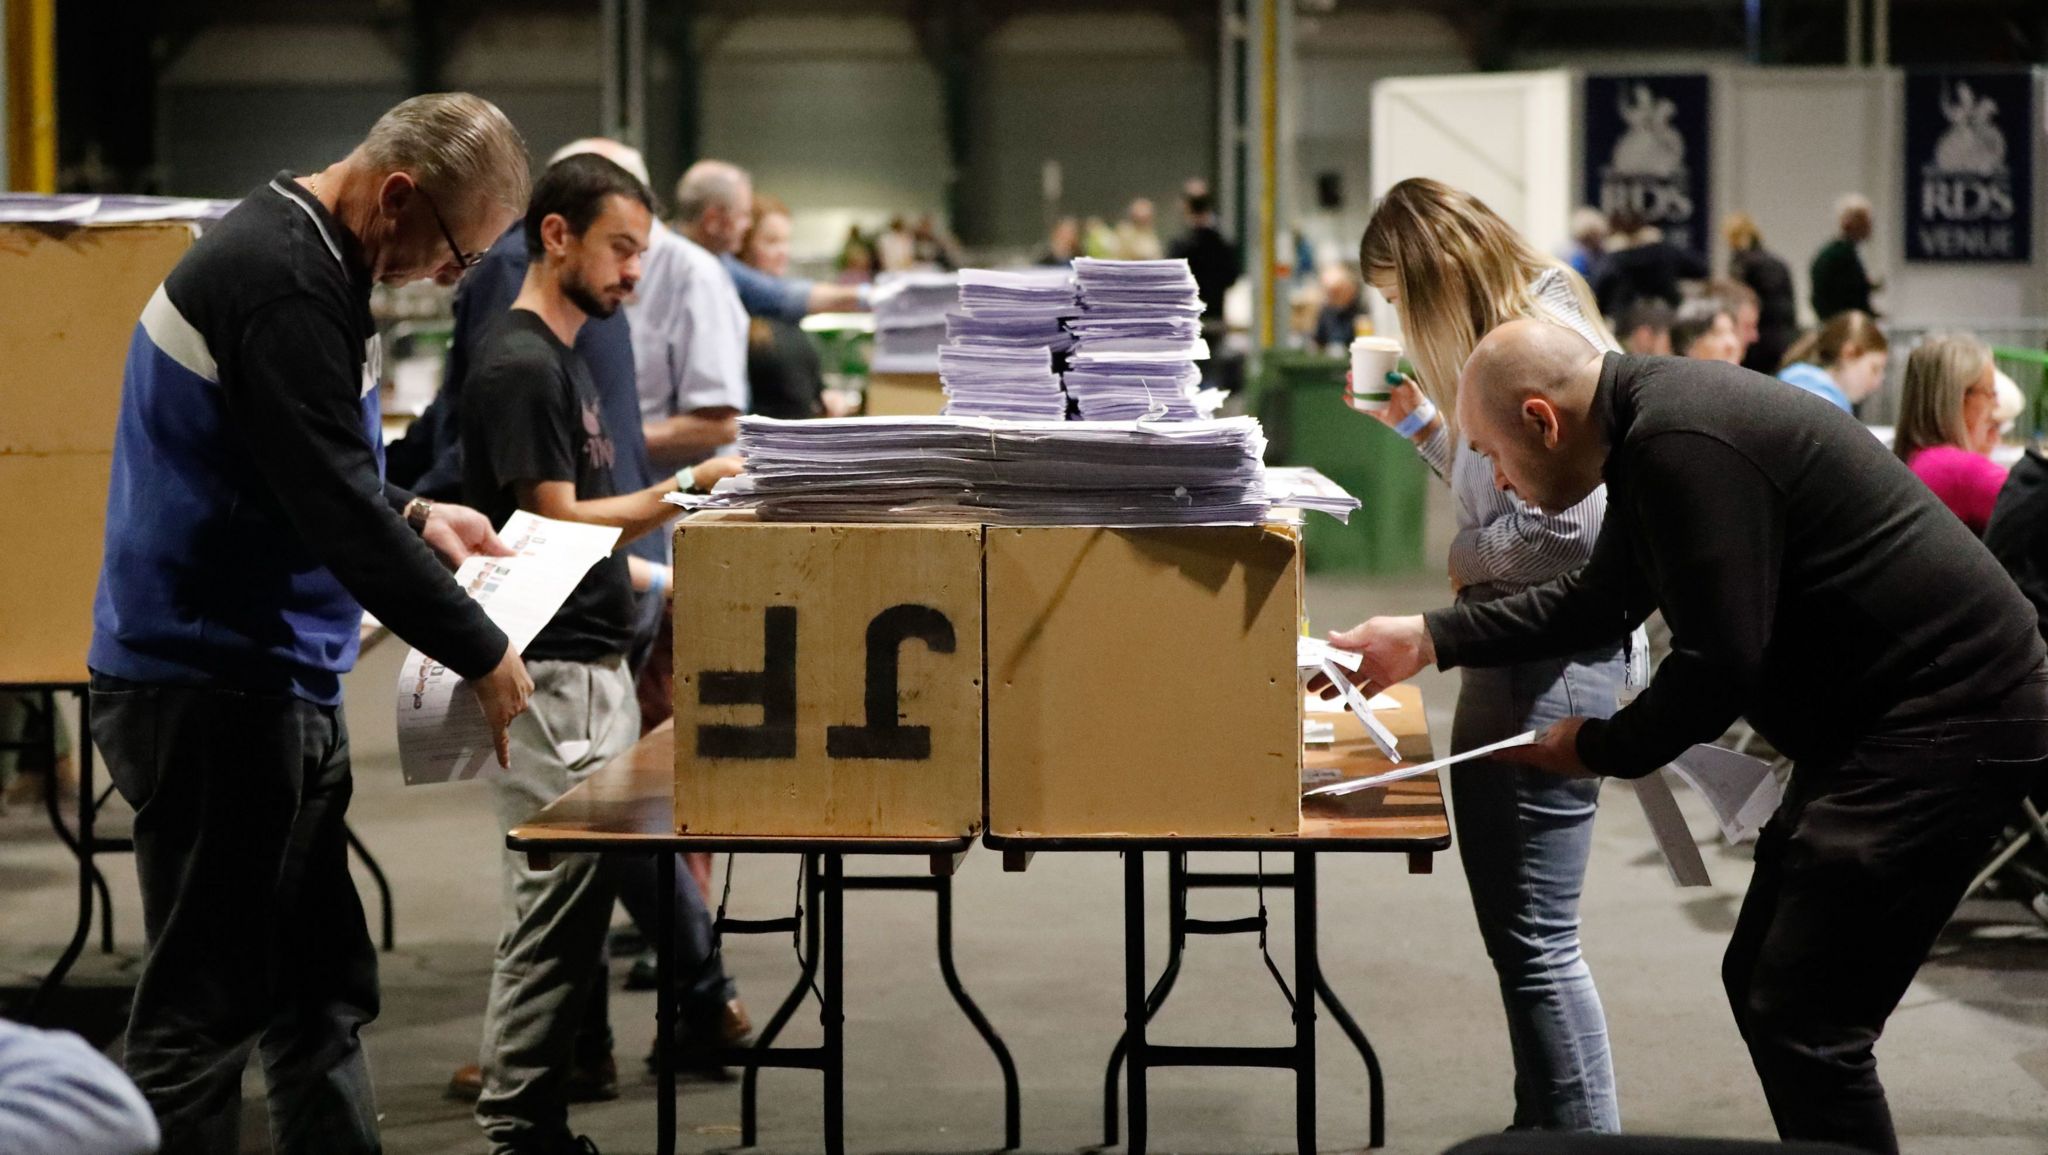 People tallying votes at the Royal Dublin Society during the count for the European elections